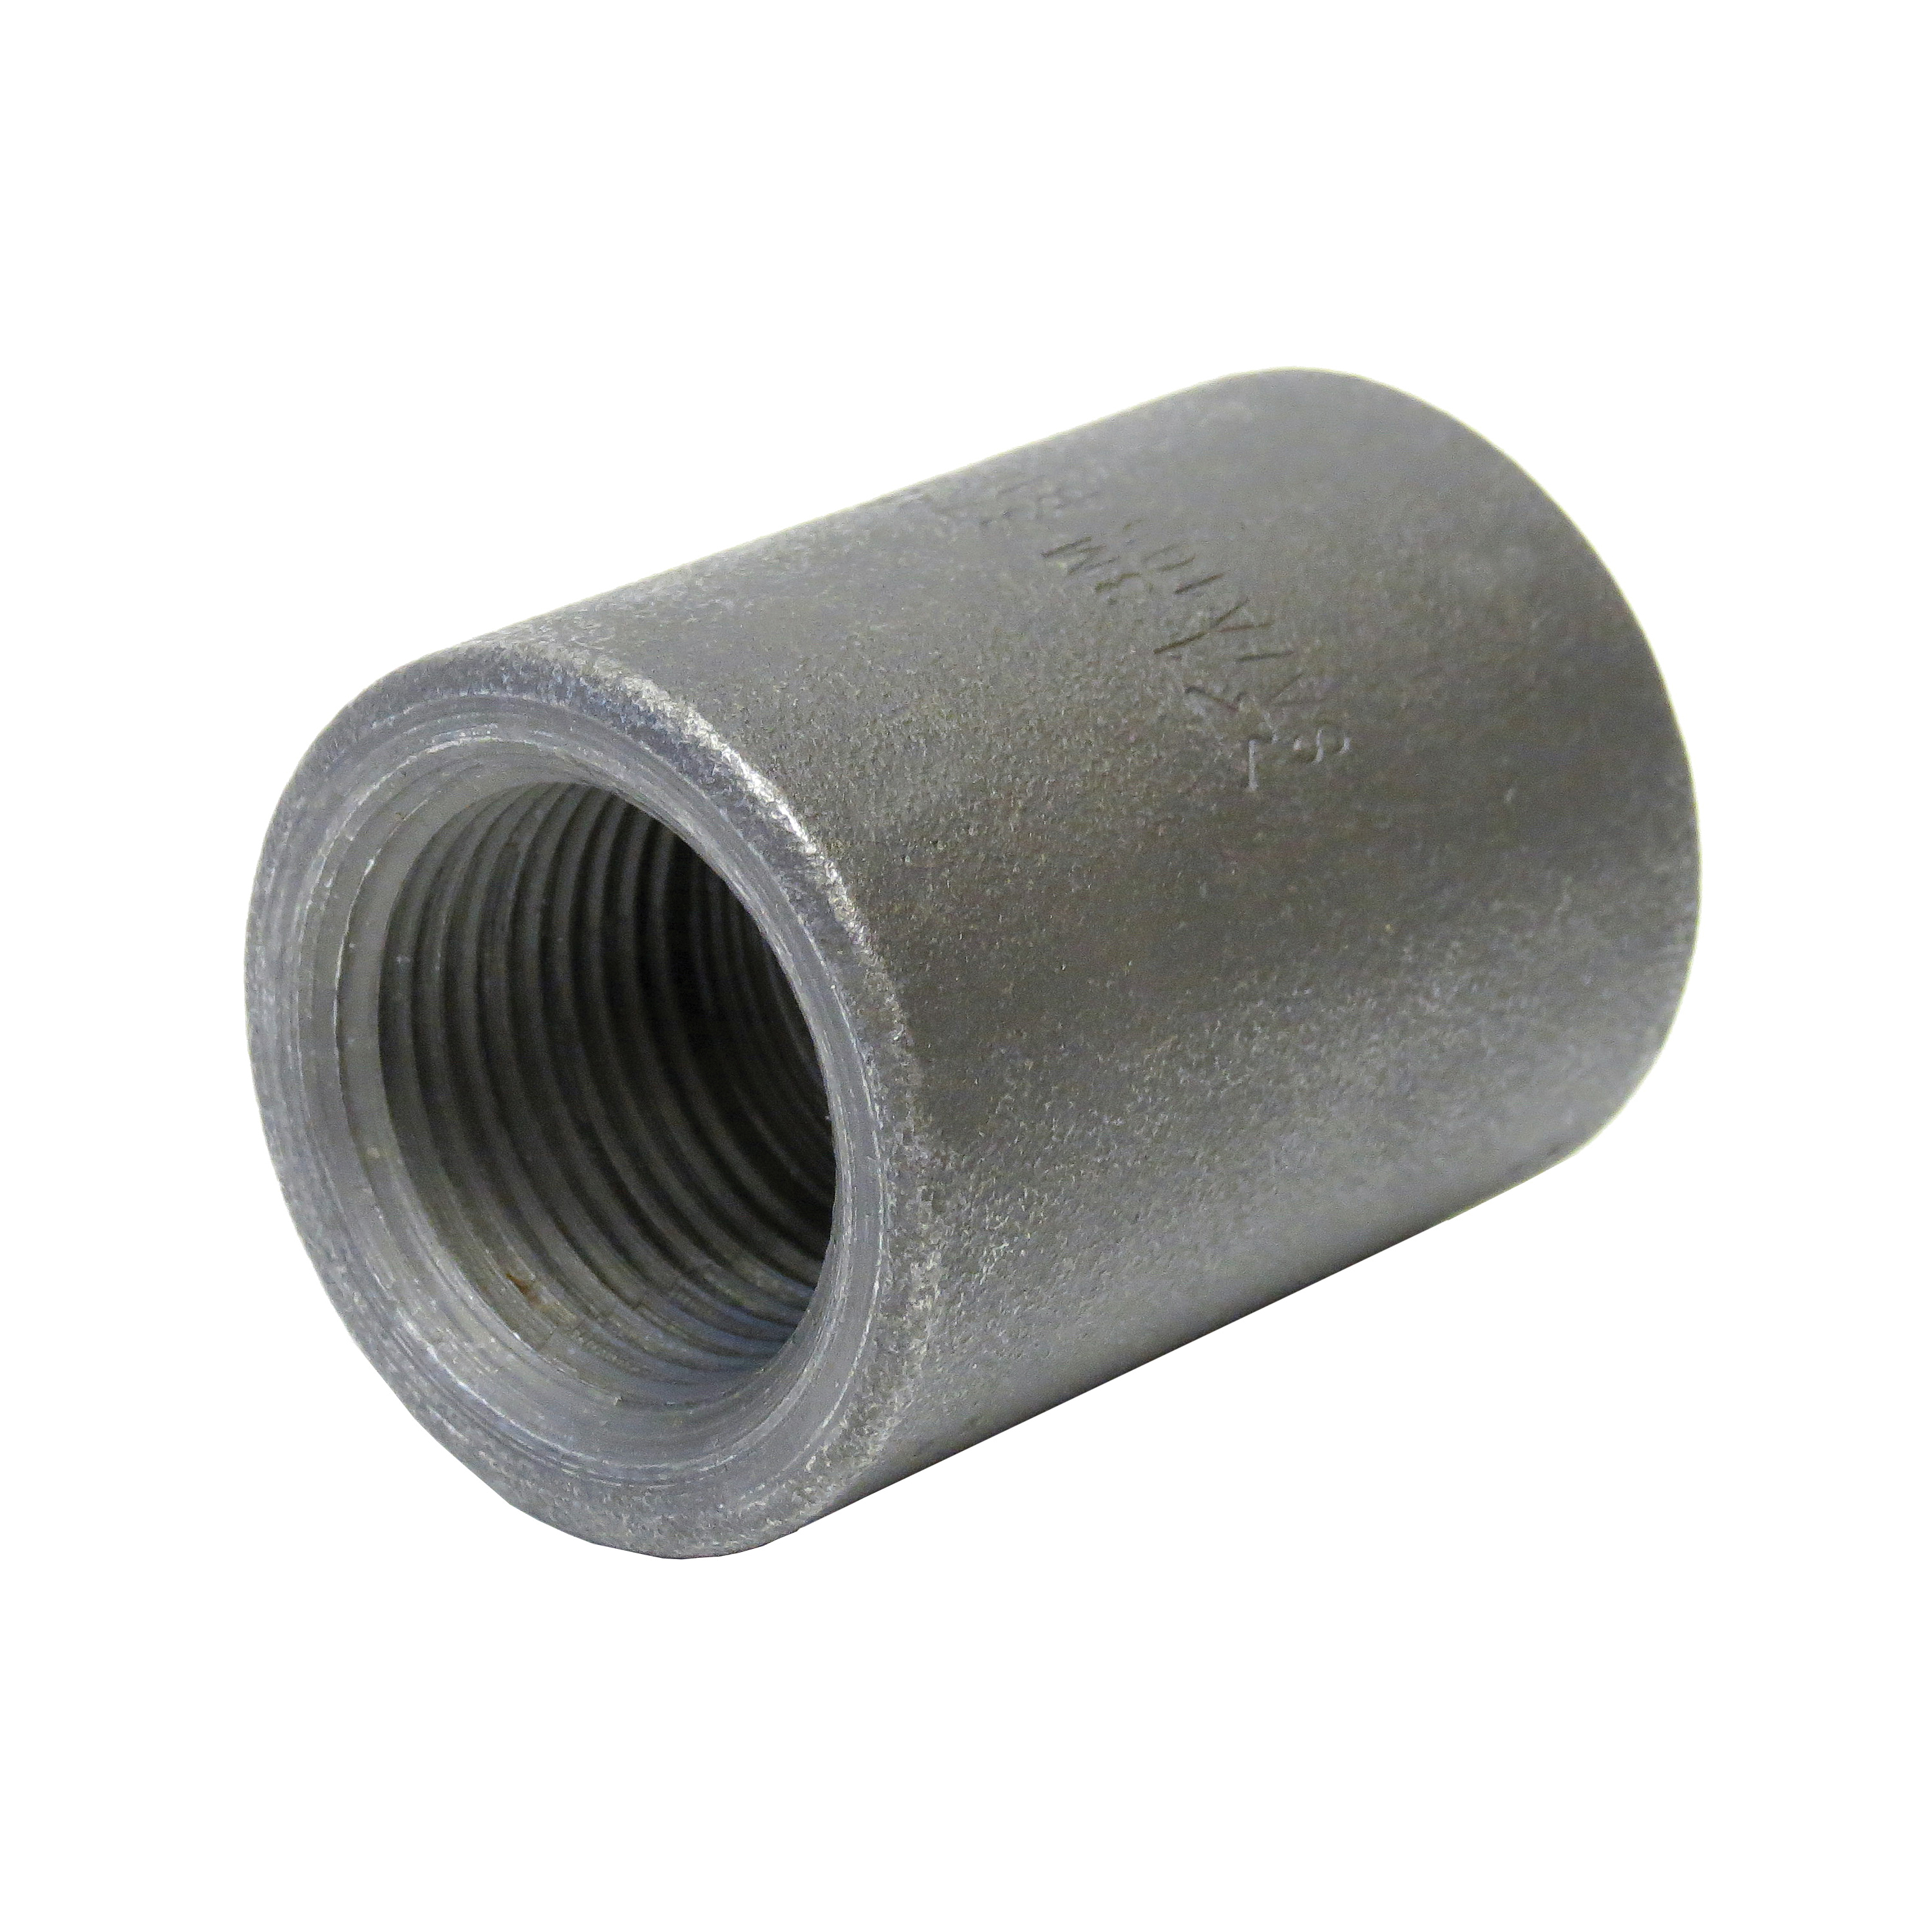 Anvil® 0361155203 FIG 2117 Pipe Coupling, 1/4 in Nominal, FNPT End Style, 3000 lb, Steel, Black Oxide, Domestic